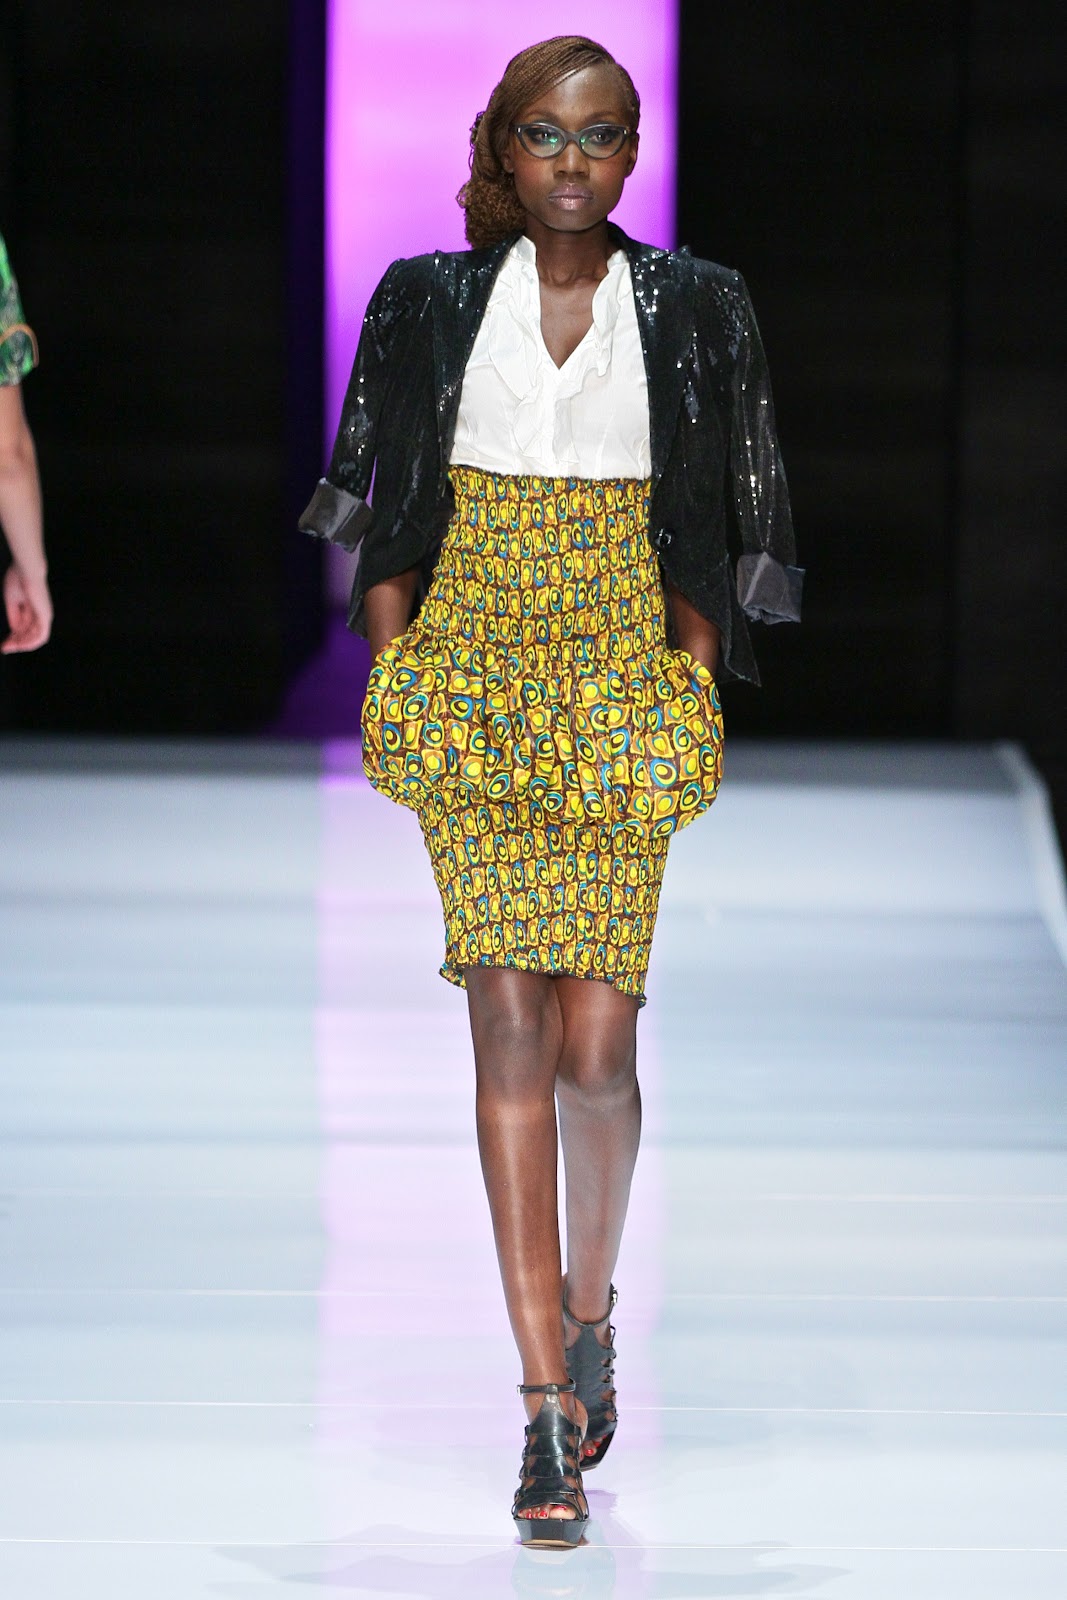 Maestro's Media: LIZ OGUMBO AT THE SOUTH AFRICAN FASHION WEEK 2012